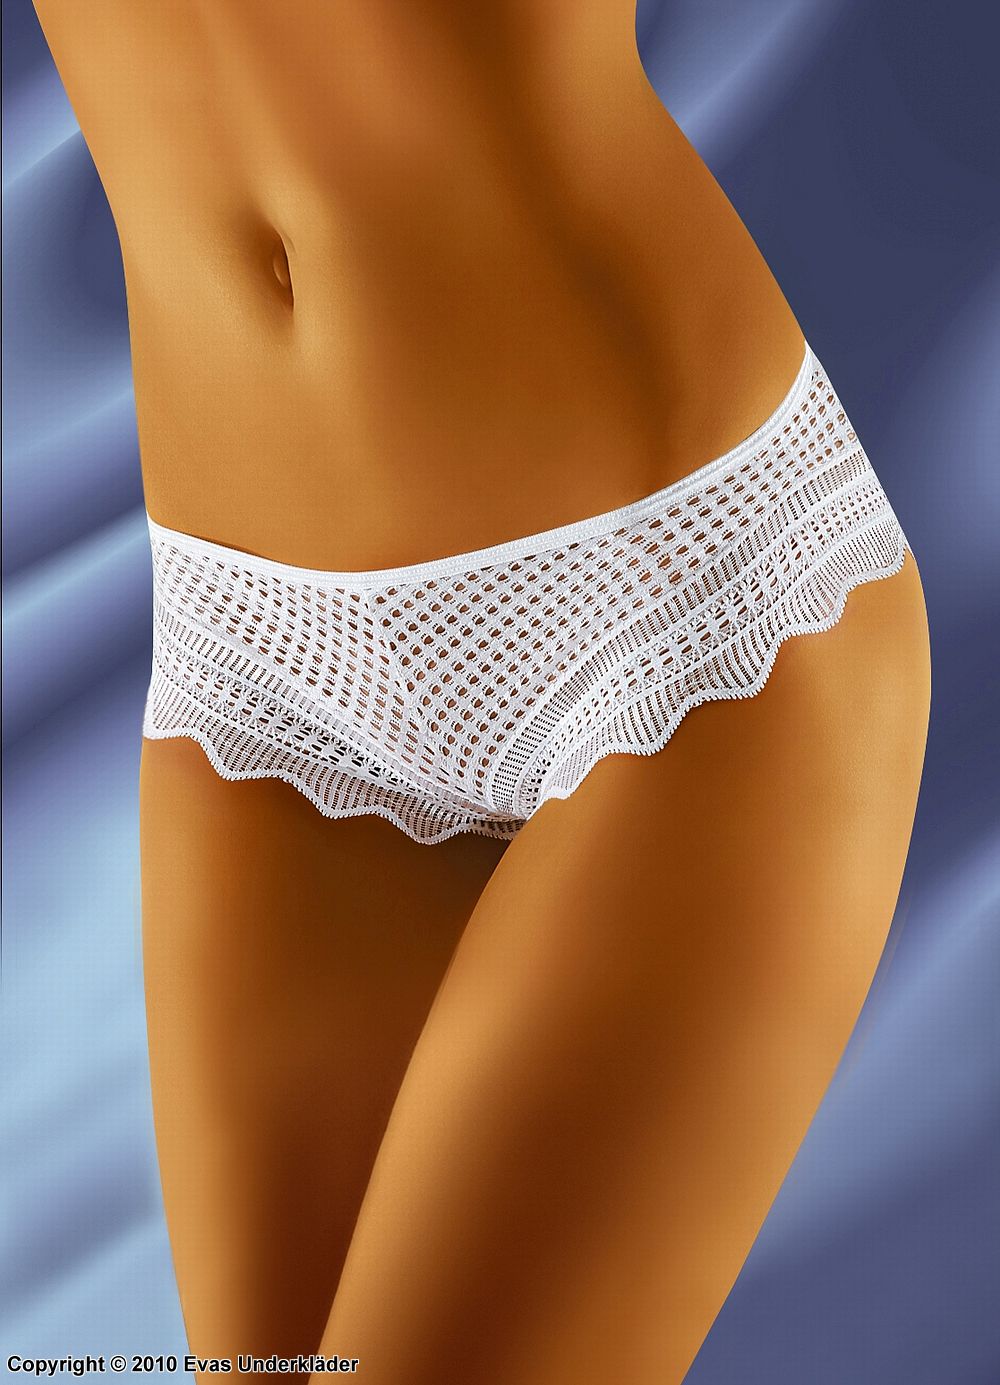 Hipster panty with crocheted patterns